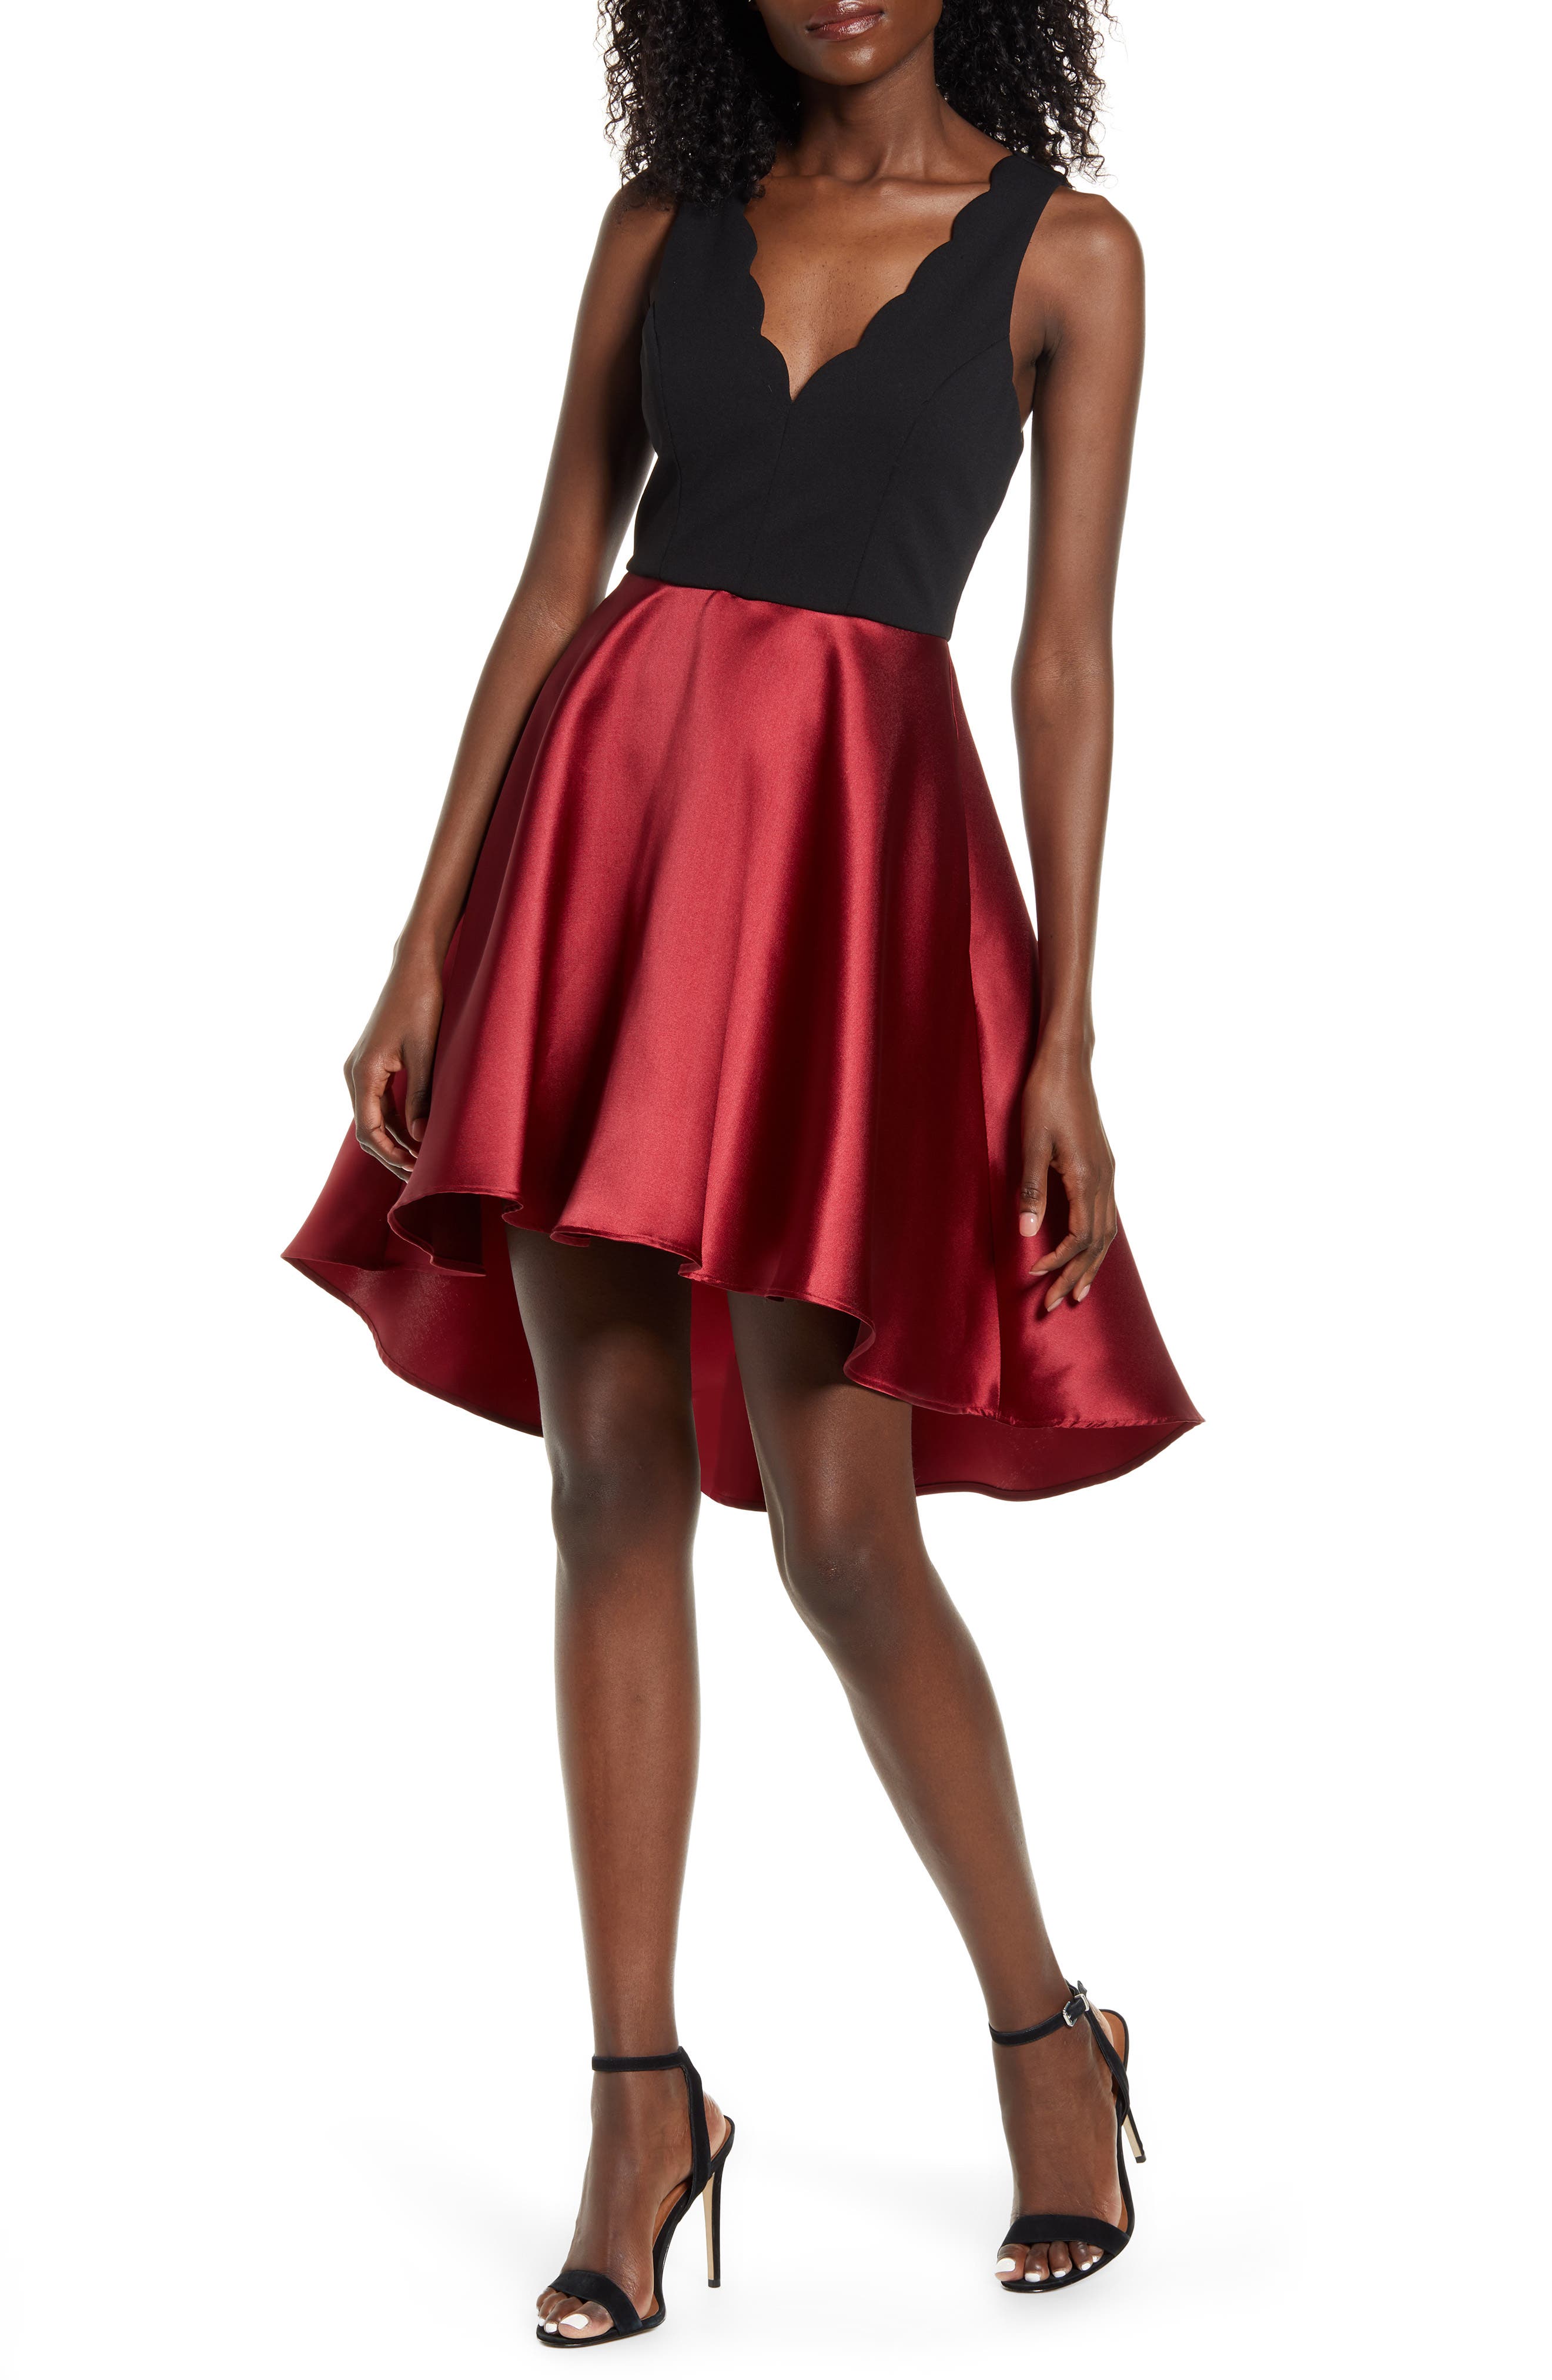 nordstrom homecoming dresses 2019